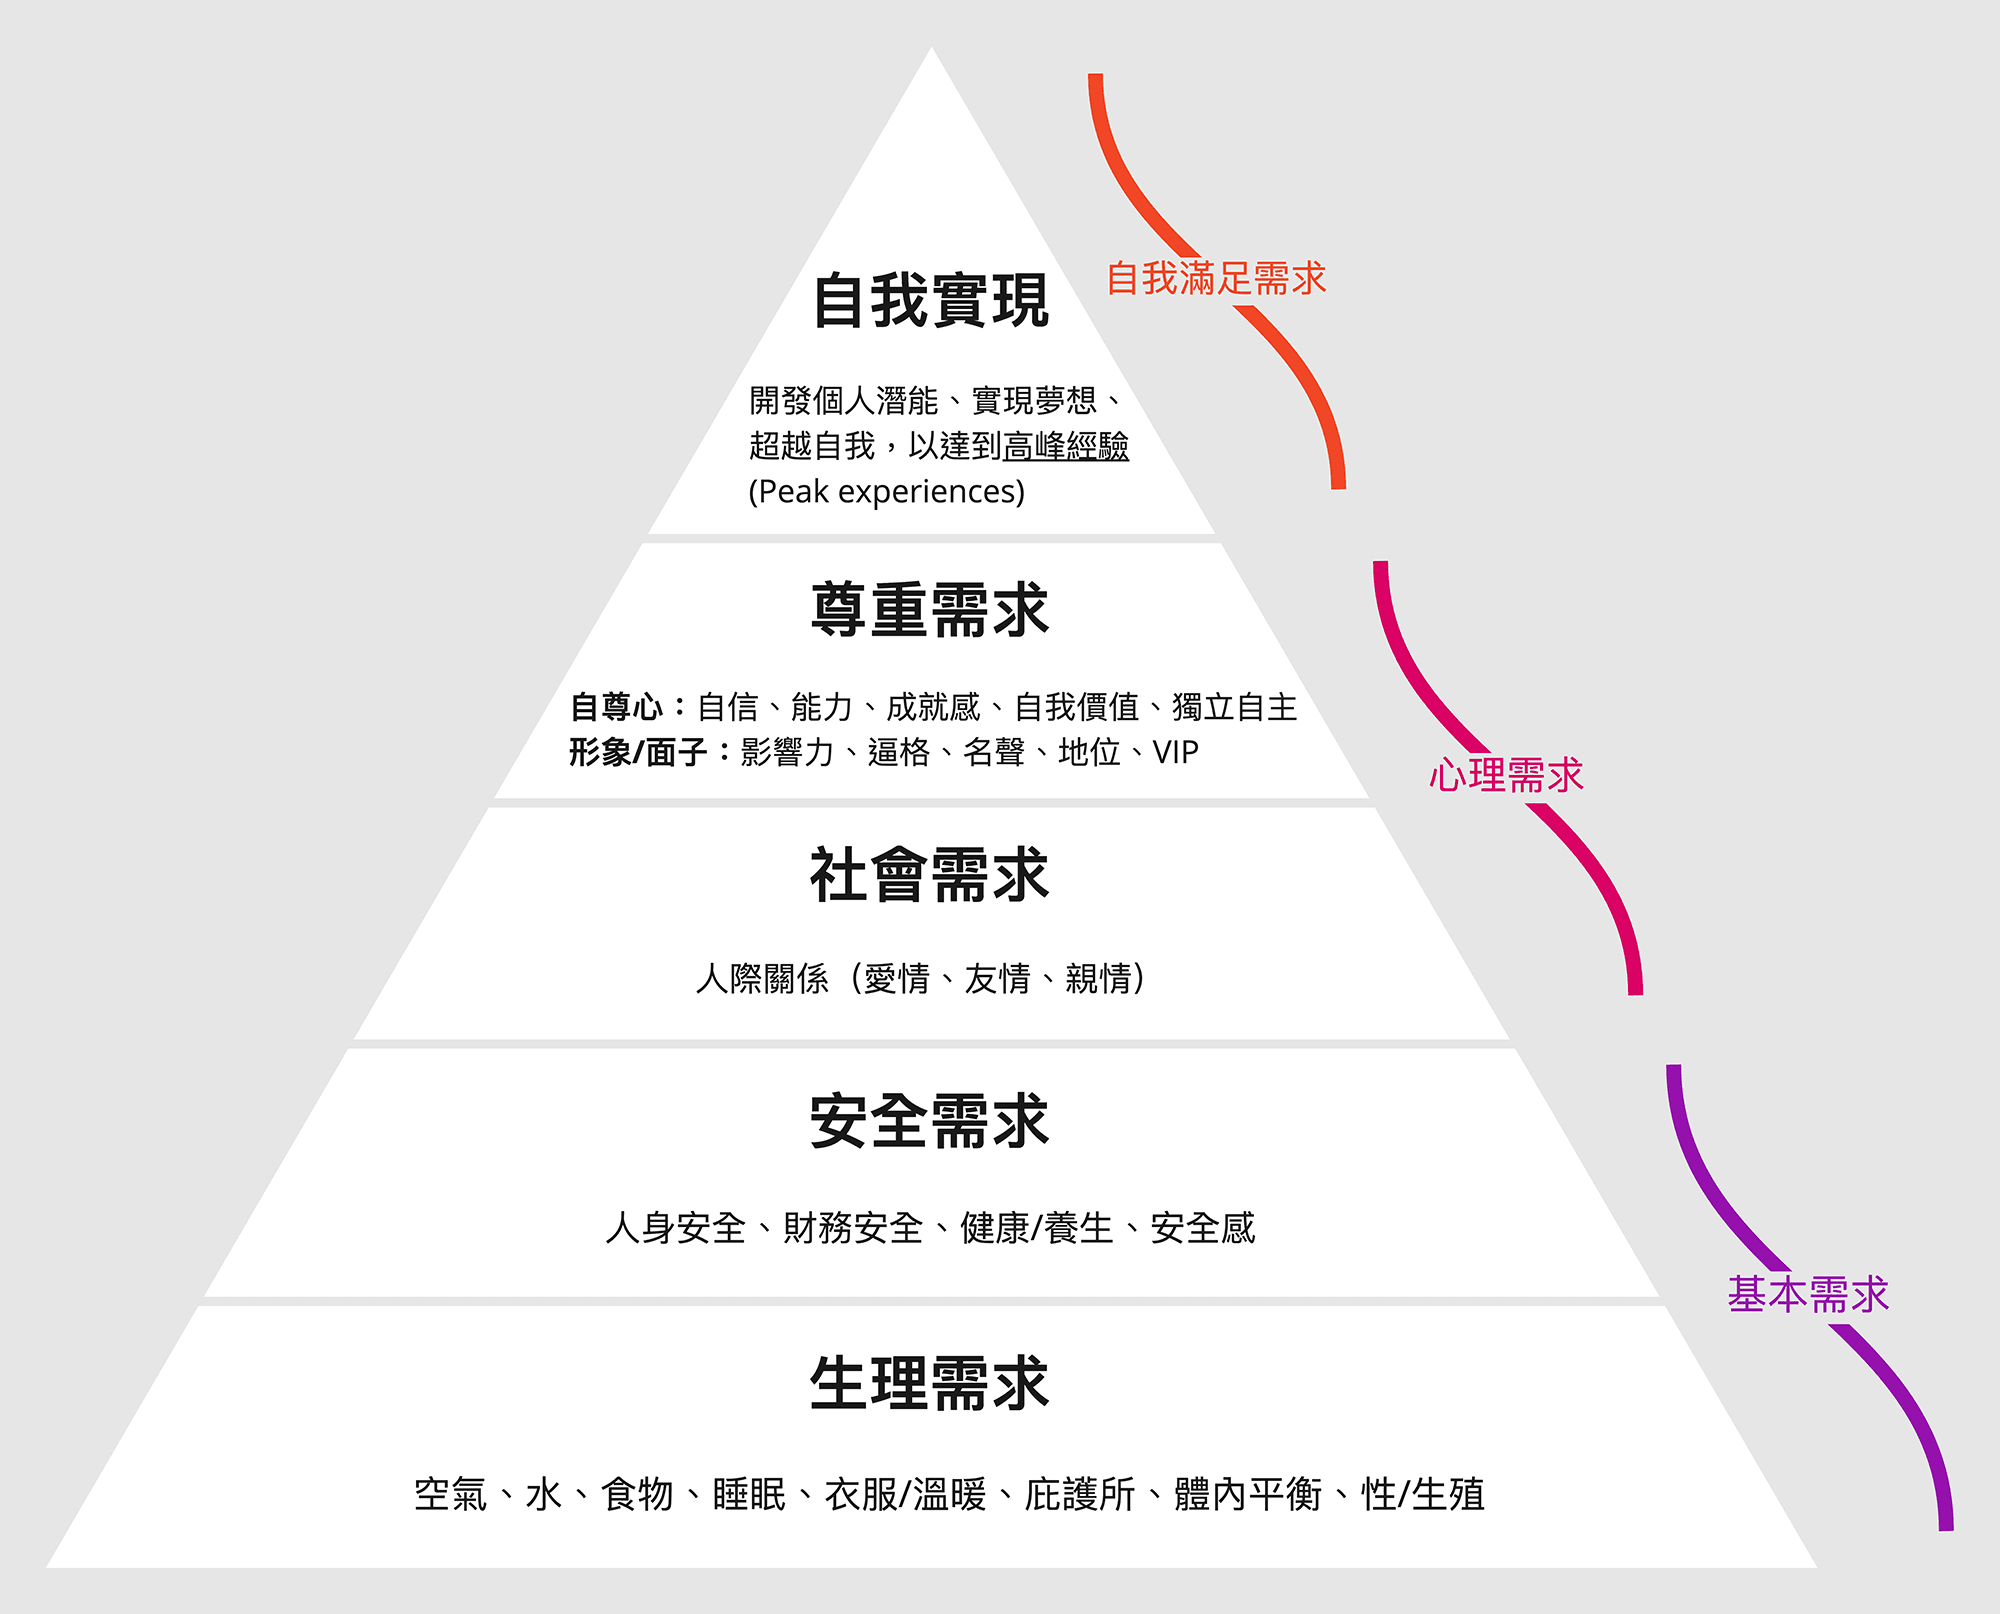 maslow-2000.png#s-2000,1614